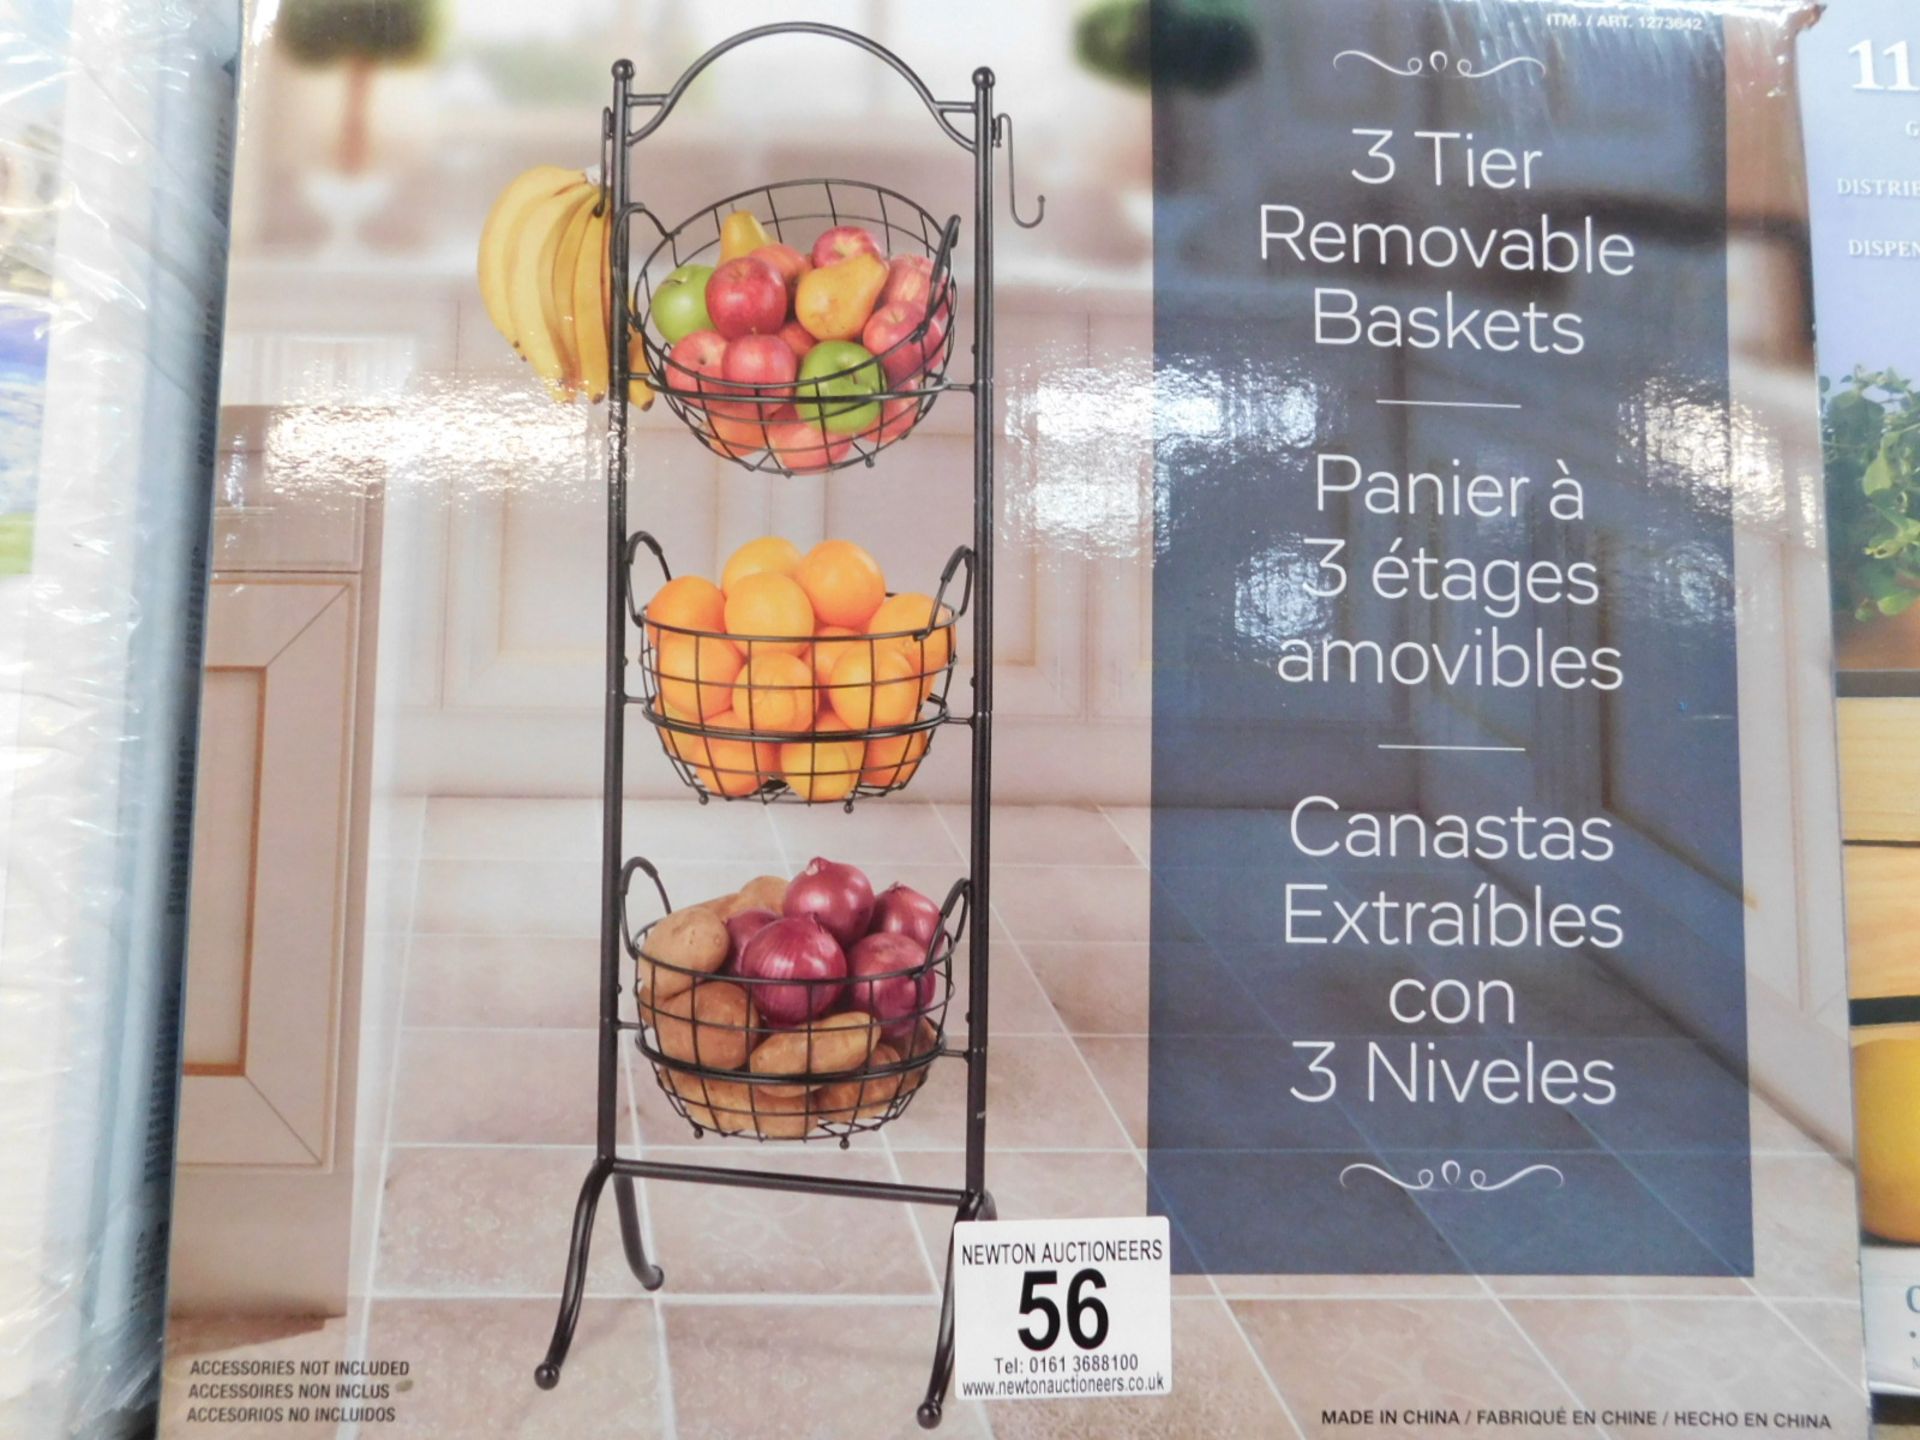 1 BOXED 3-TIER REMOVABLE METAL BASKETS RRP Â£39.99